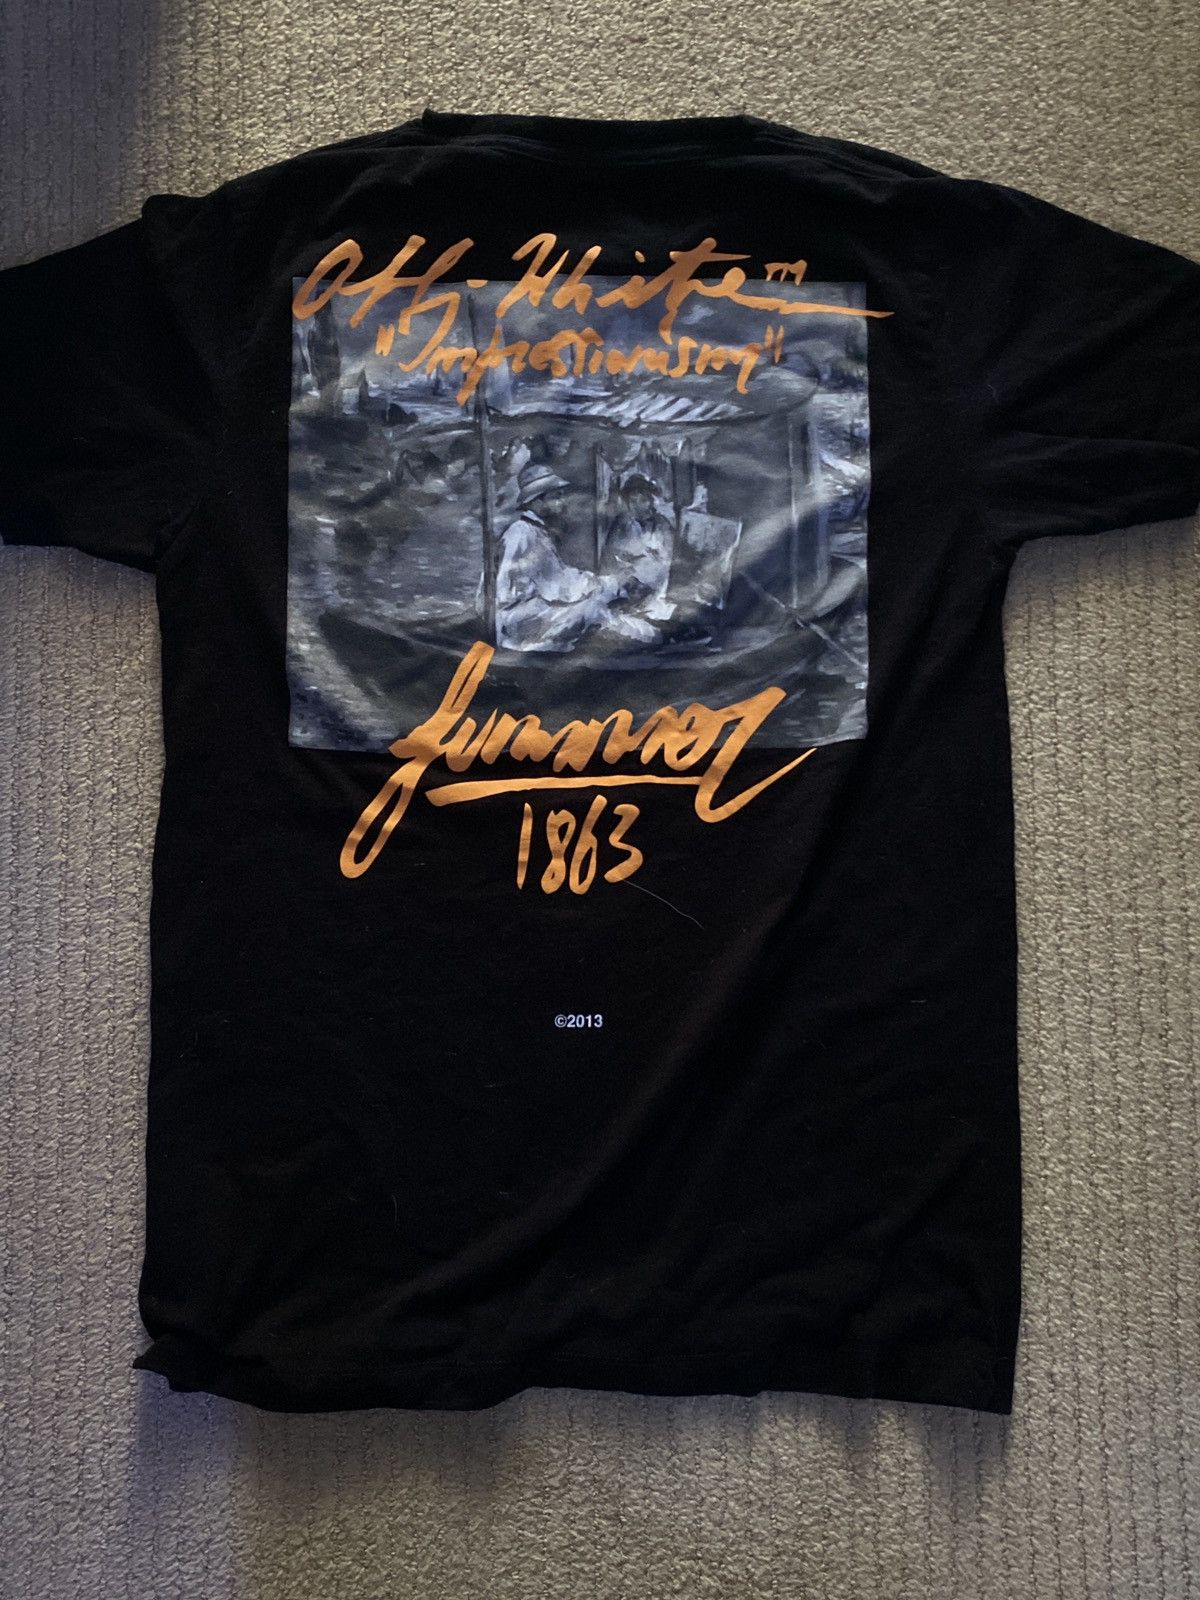 Off-White Off-White 1863 “IMPRESSIONISM” Tee | Grailed